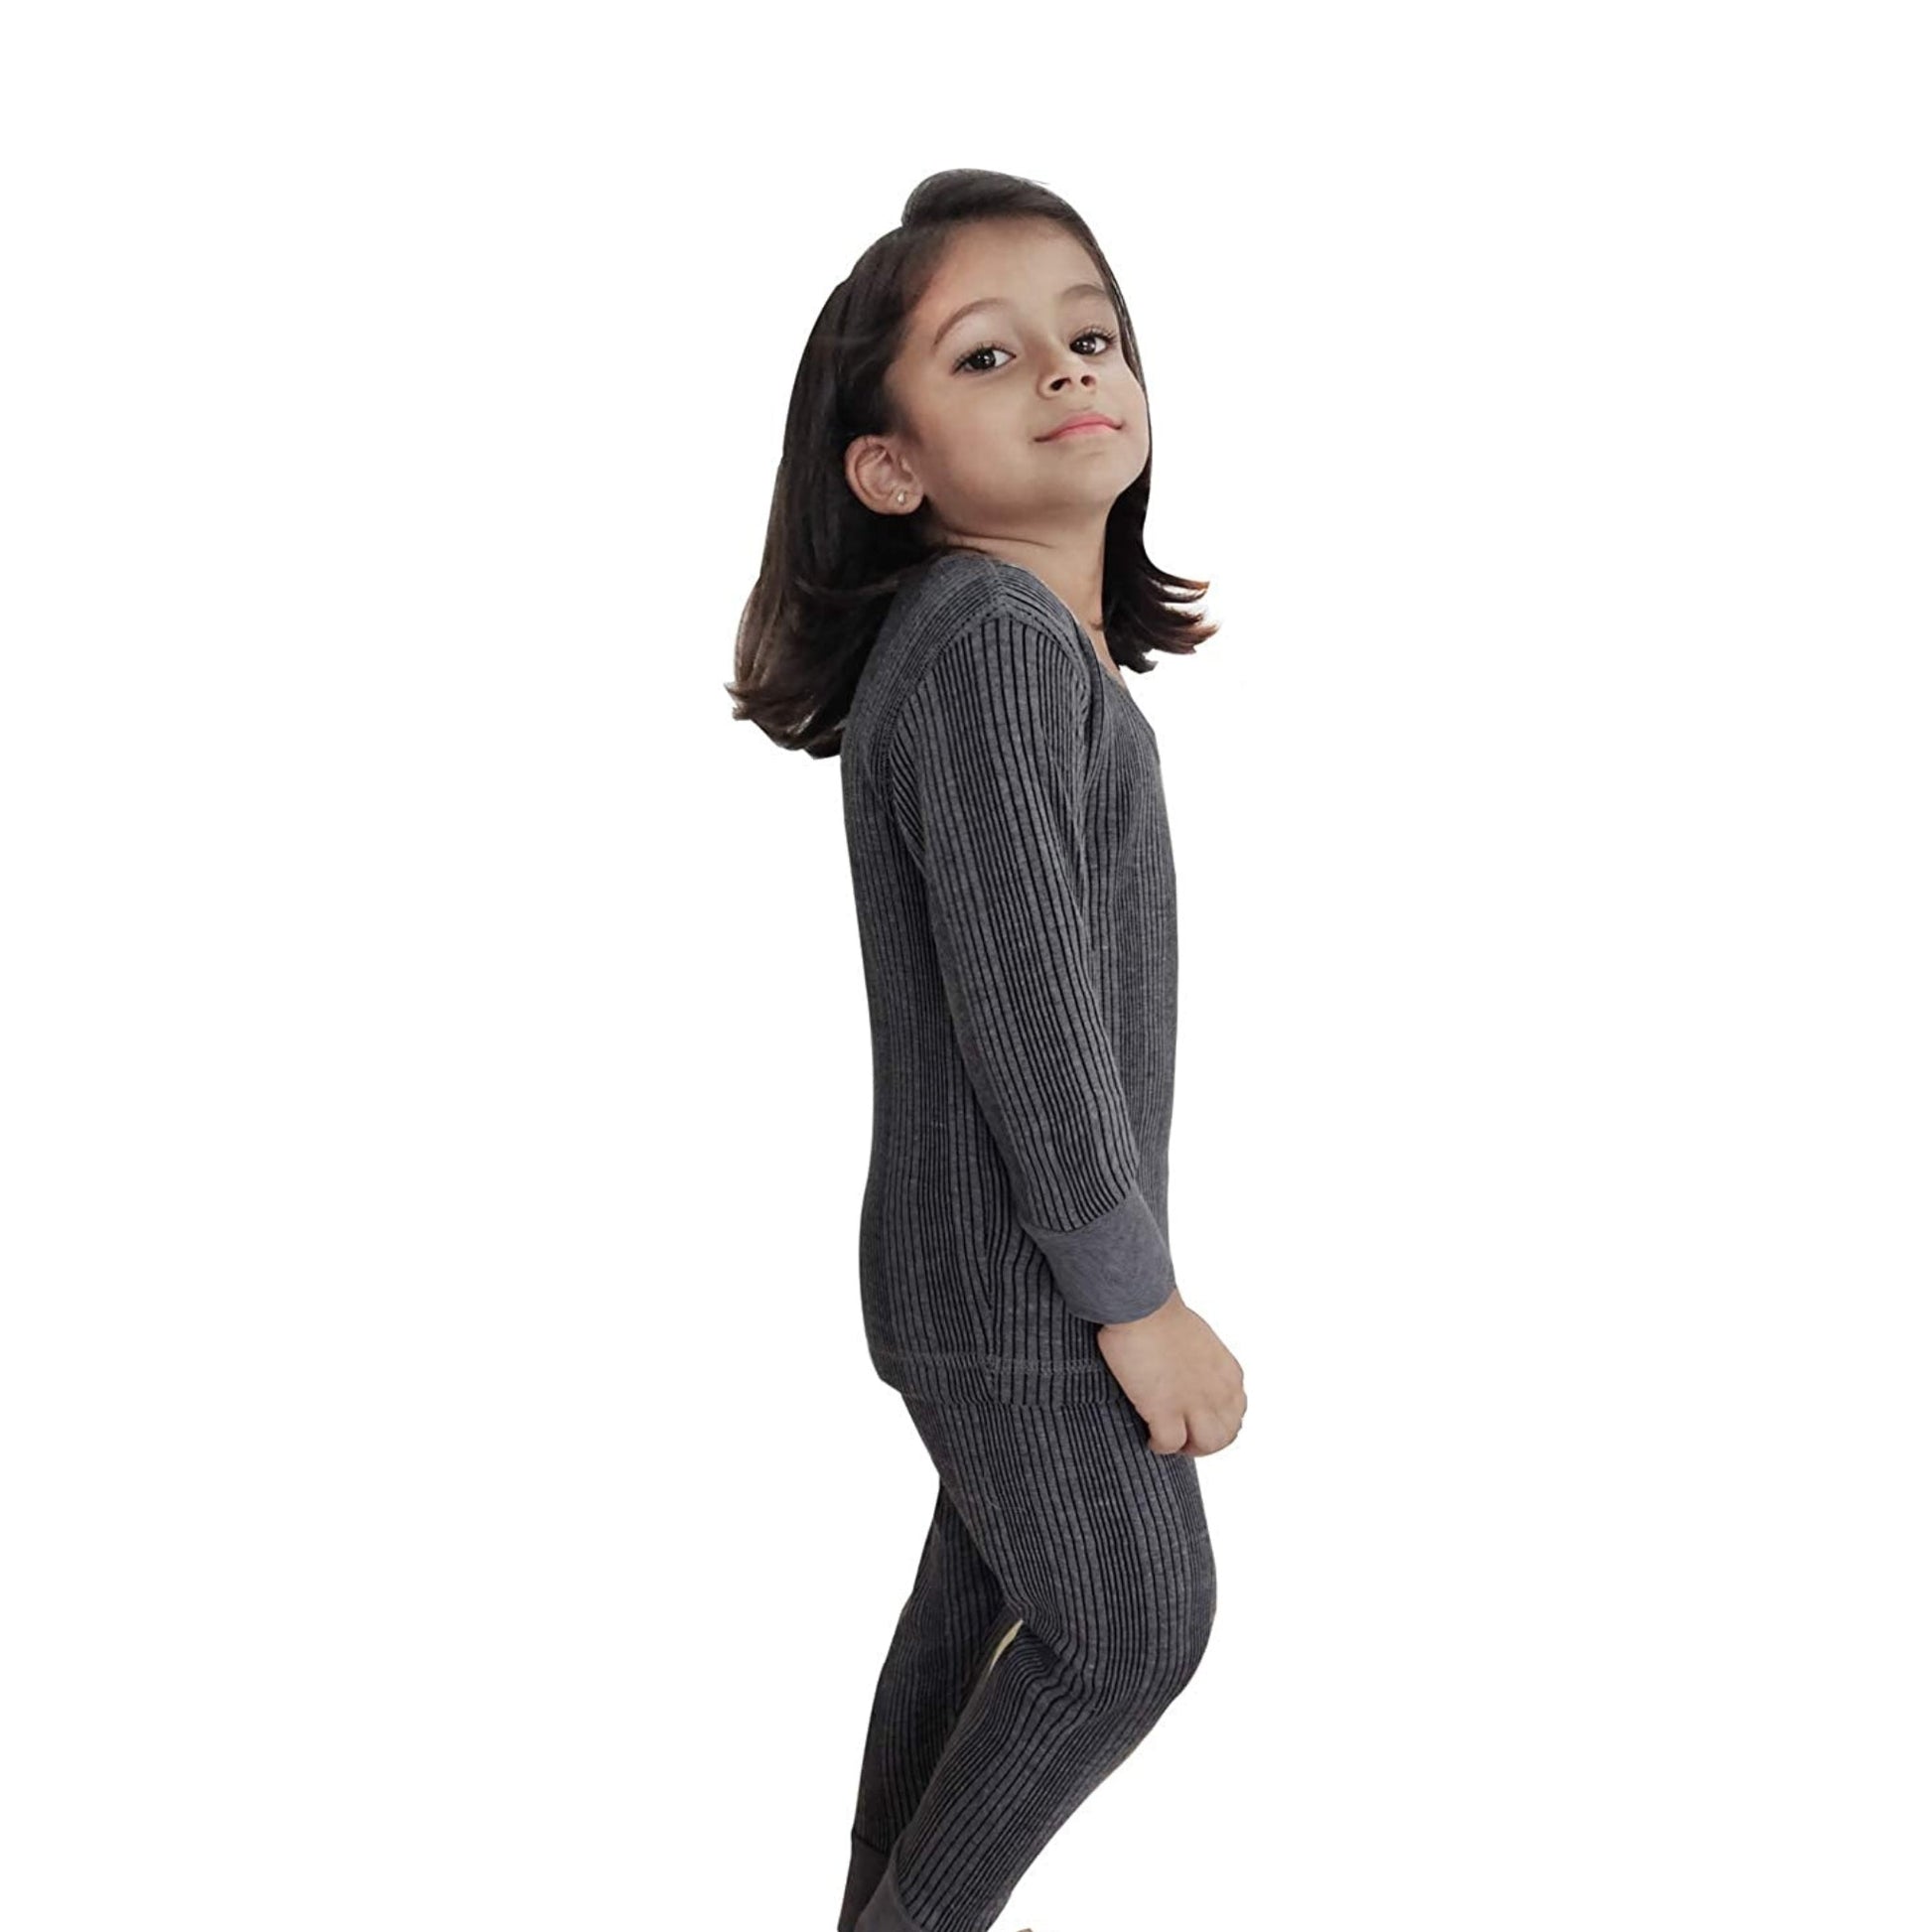 YOUTH ROBE's Thermal For Kids Set (Grey) - YOUTH ROBE